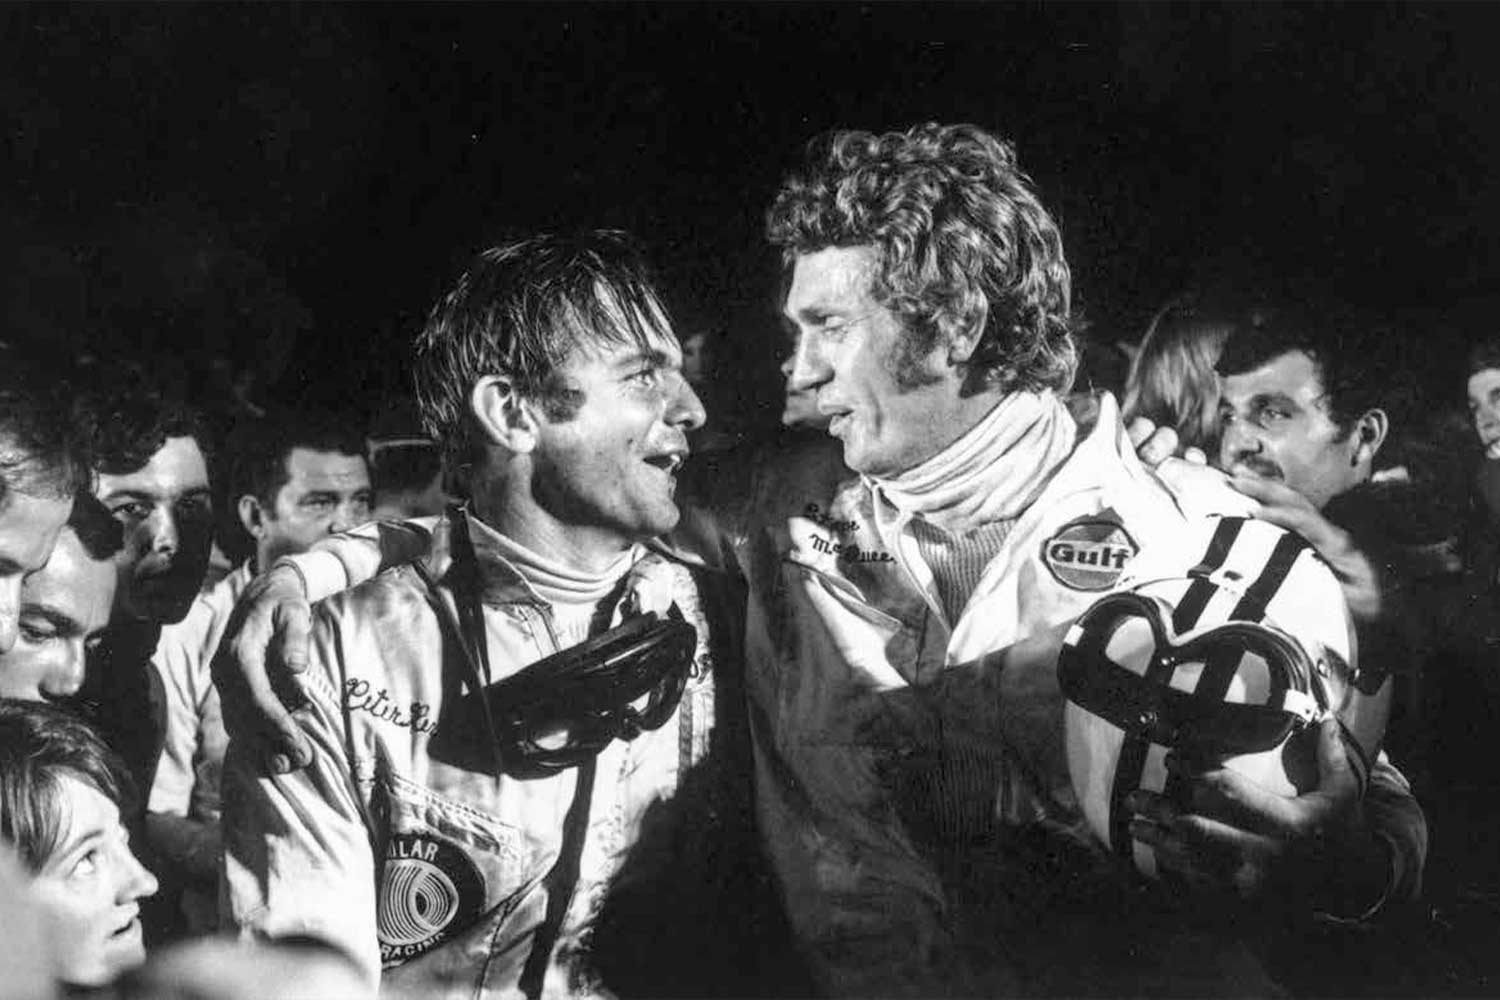 Steve McQueen with with teammate Peter Revson at the 1970 12 Hours of Sebring, where the duo finished second overall